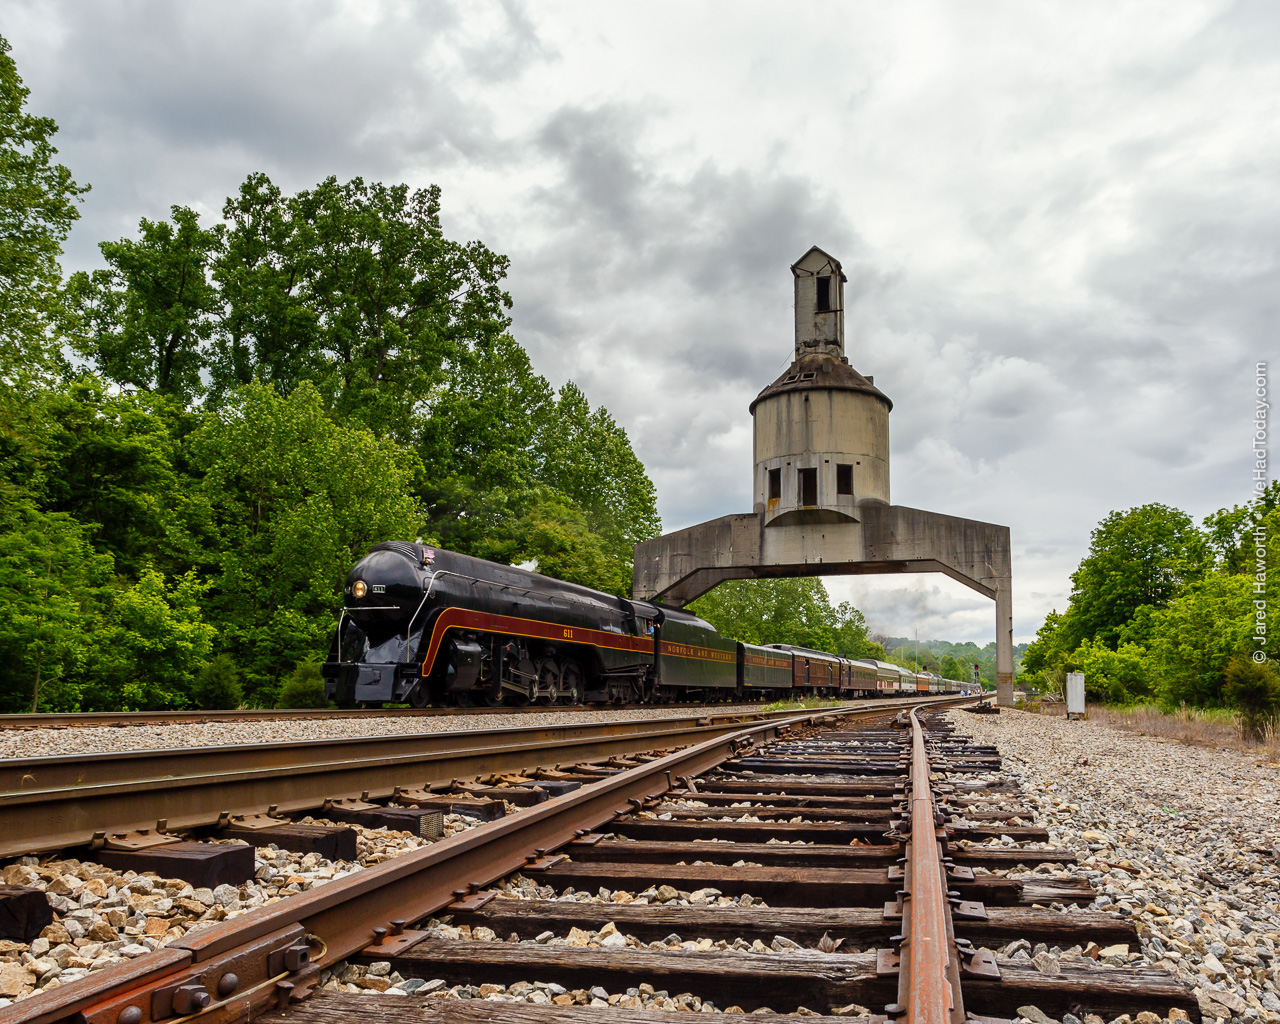 The last remaining Coaling Tower over the route from Roanoke to Christiansburg, Vicker was a popular photo location this weekend.